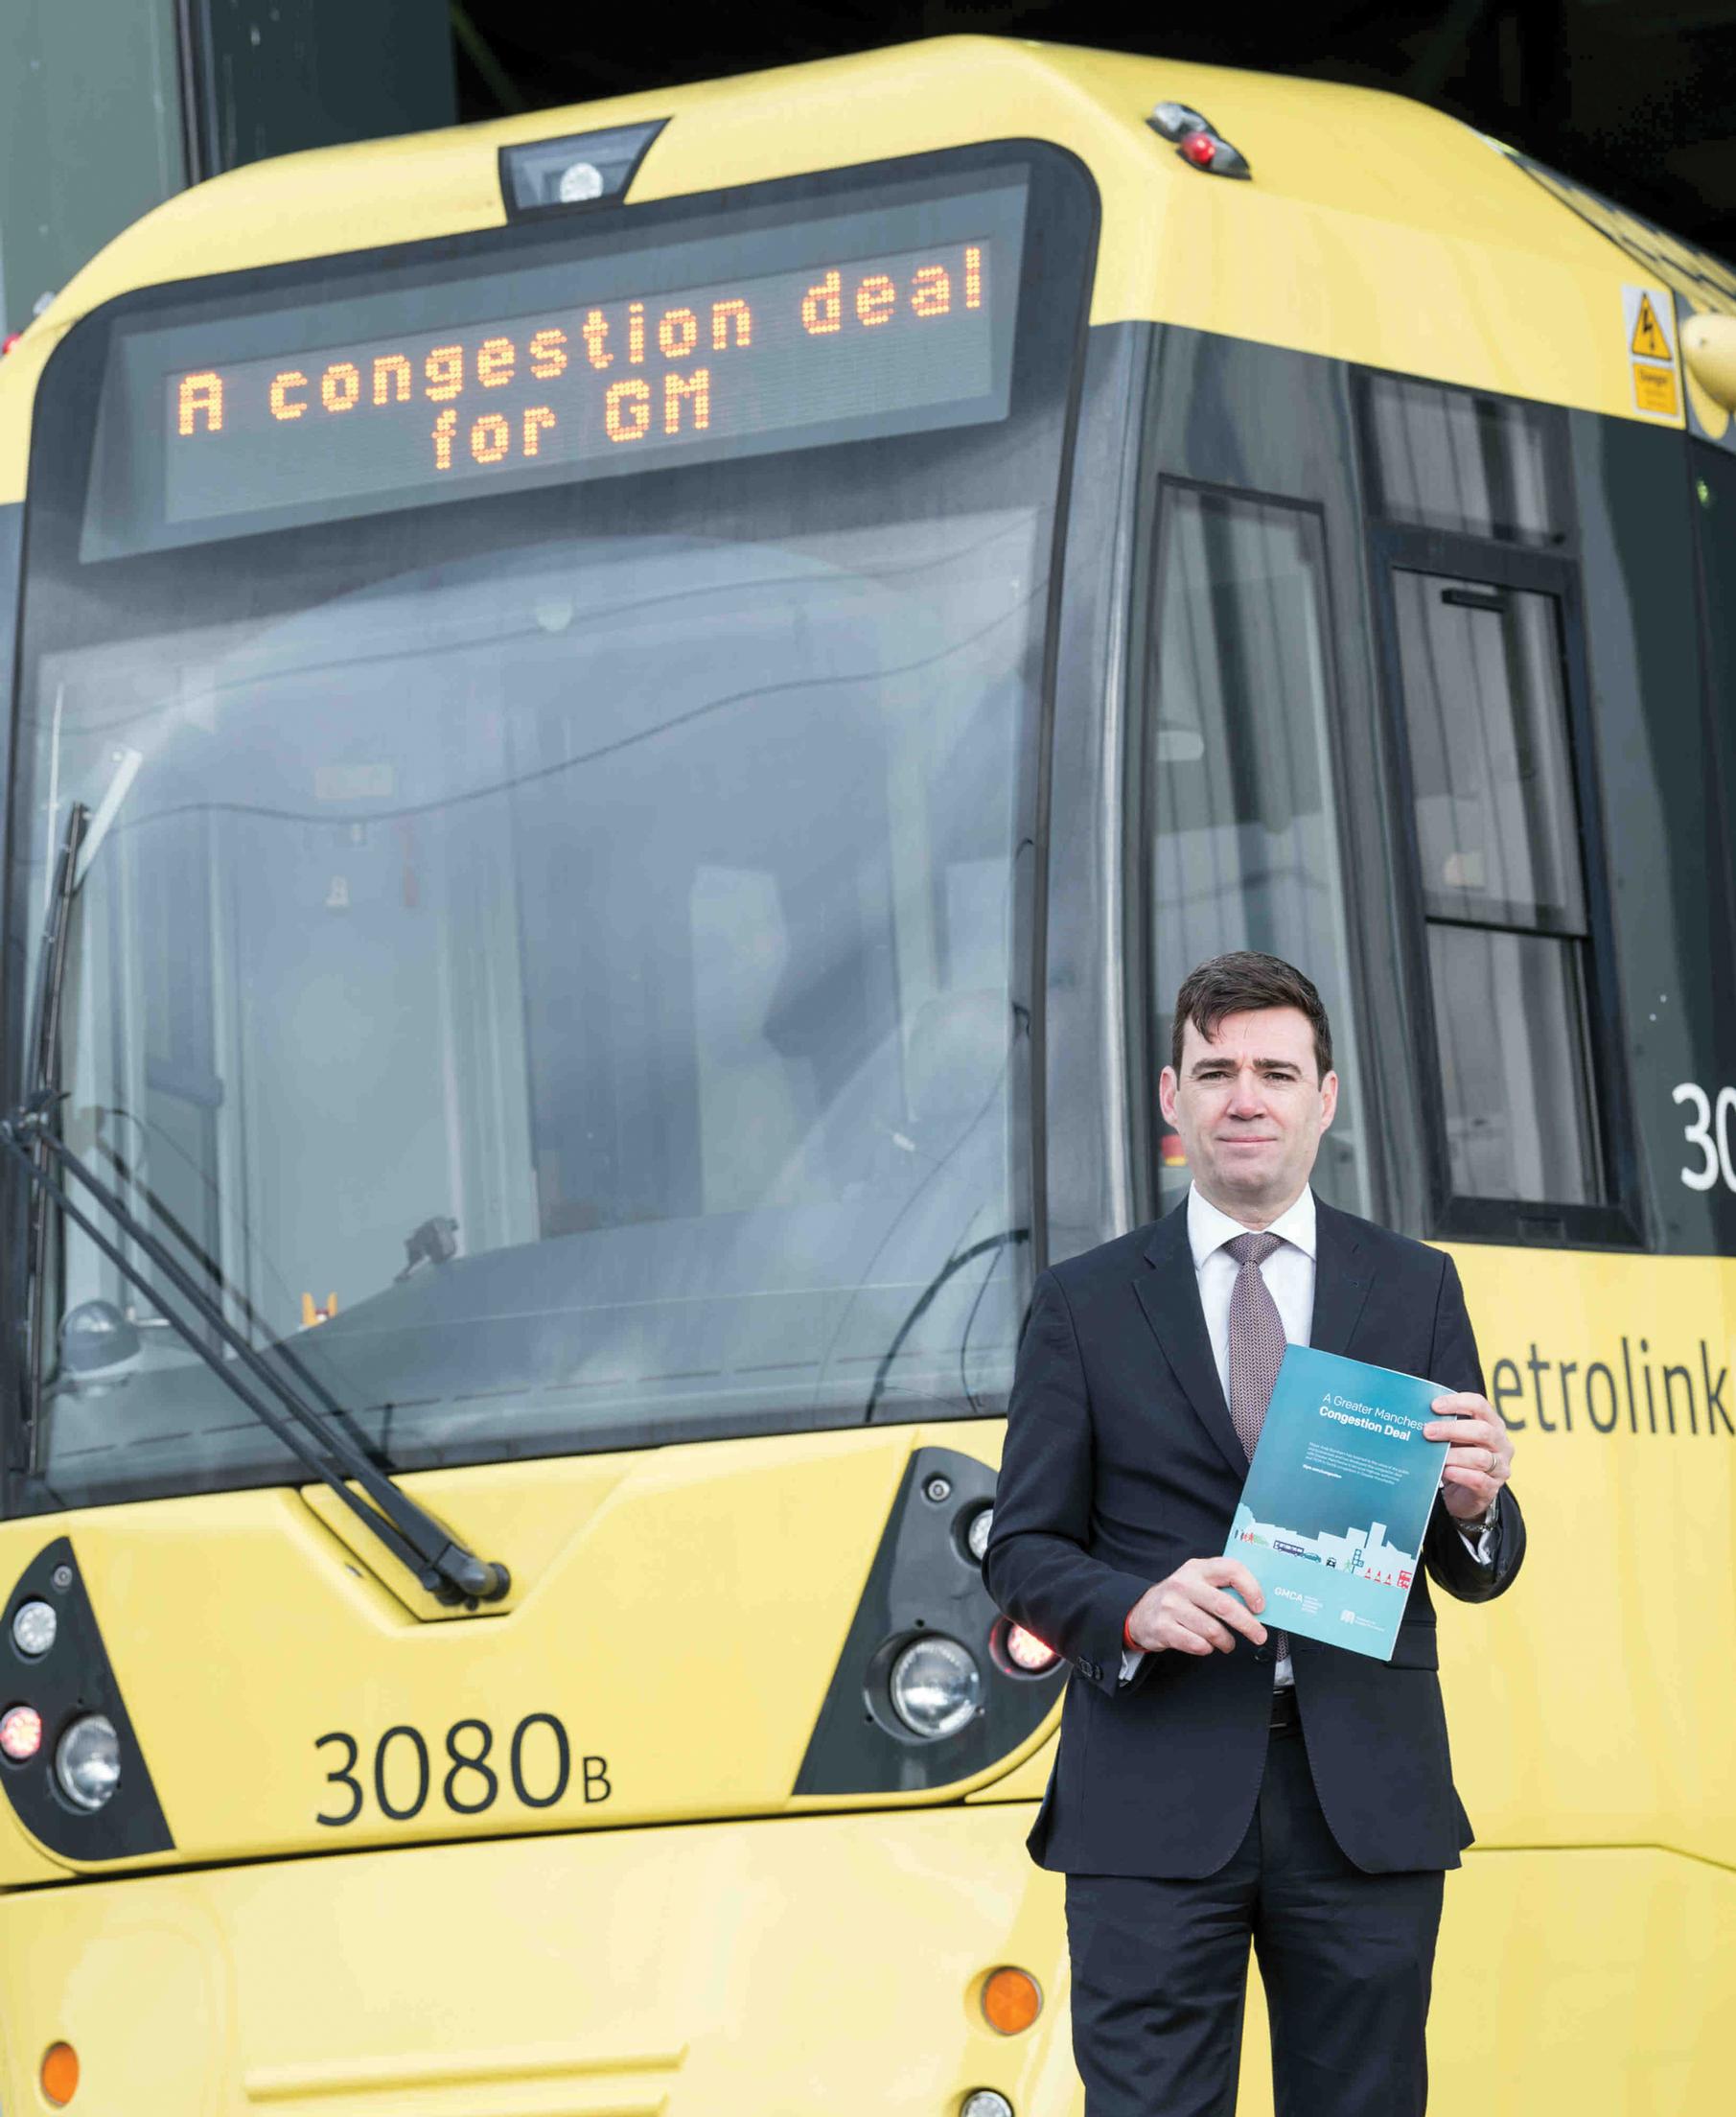 Greater Manchester mayor Andy Burnham – under significant pressure from the local media to improve bus services